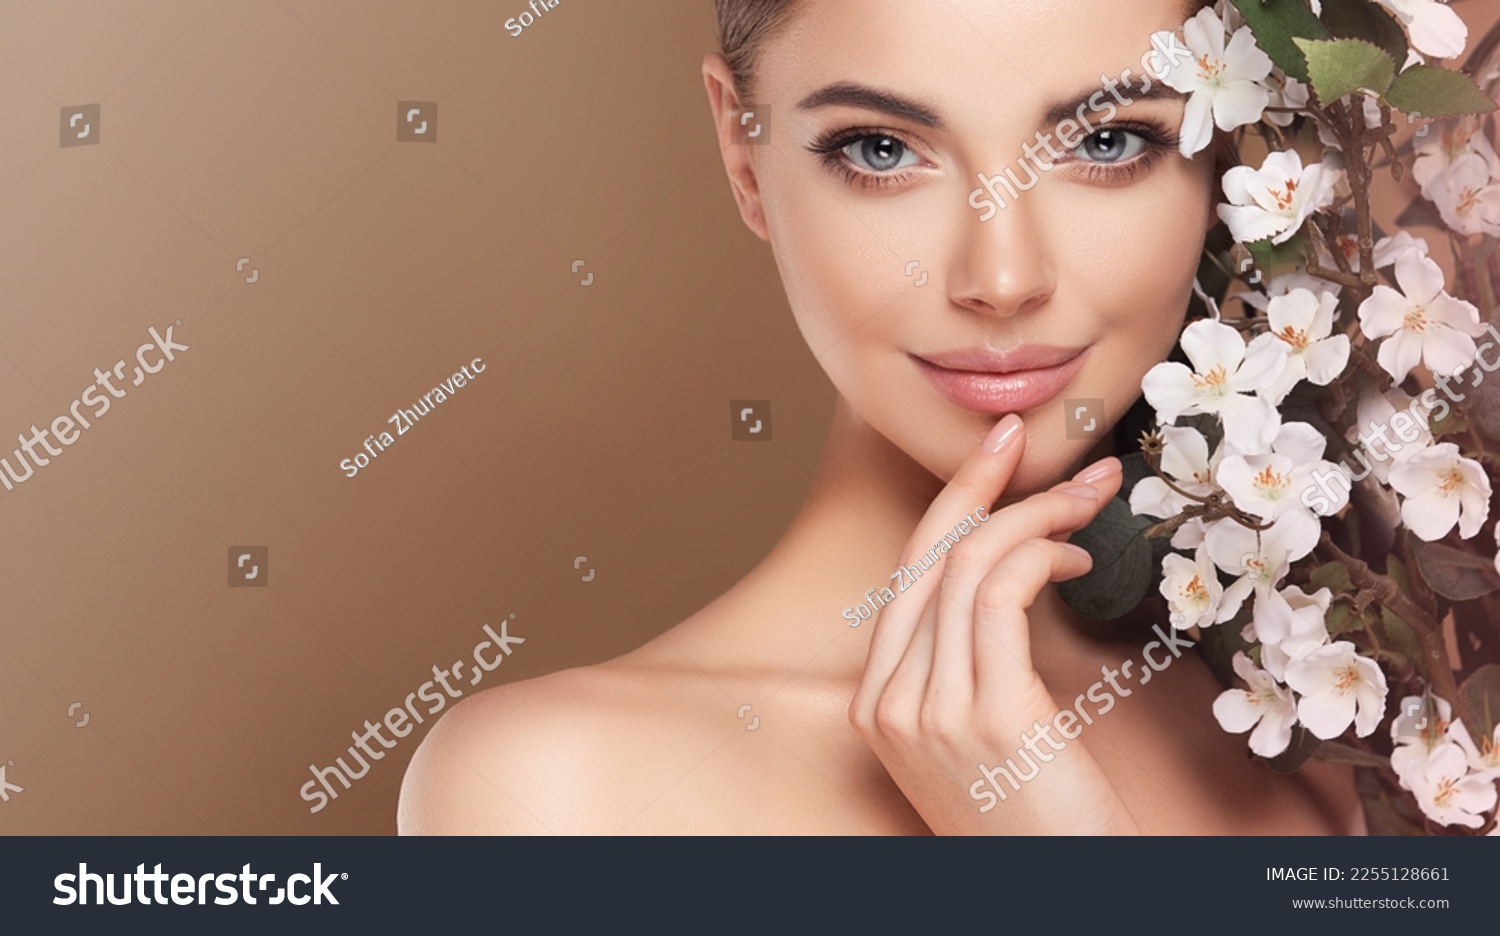 Beautiful young woman with clean fresh skin touching her face in flowers  . Girl facial  treatment   . Cosmetology , beauty  and spa . Female  model, care concept  #2255128661